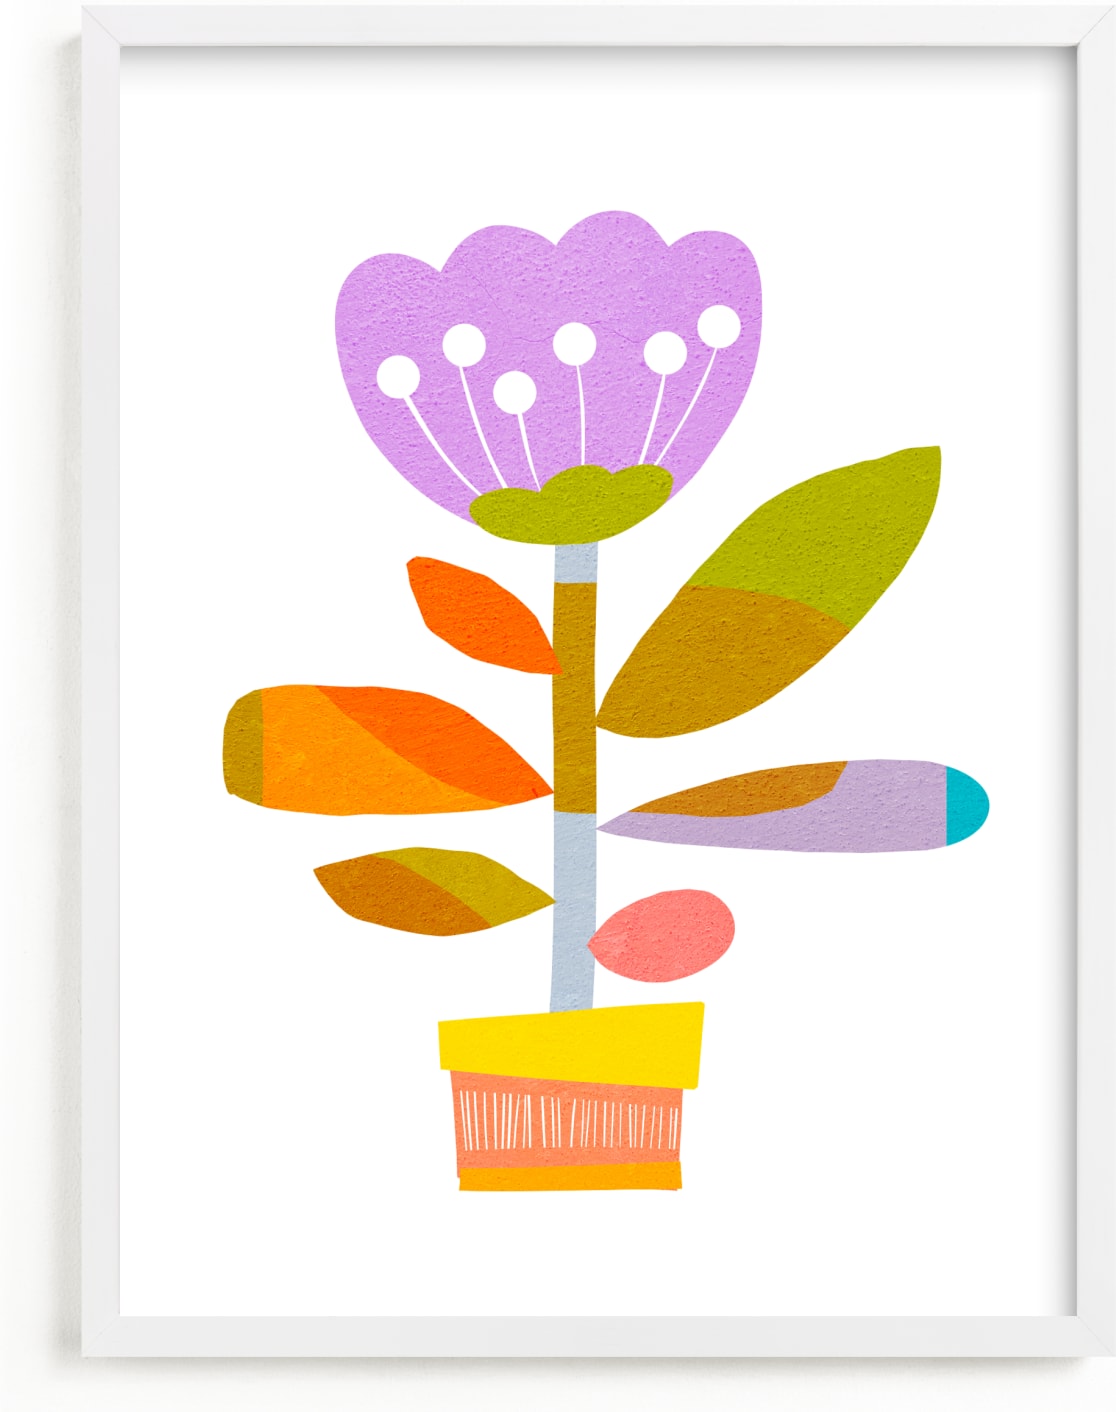 This is a colorful kids wall art by Dominique Vari called The Happiest Flower .